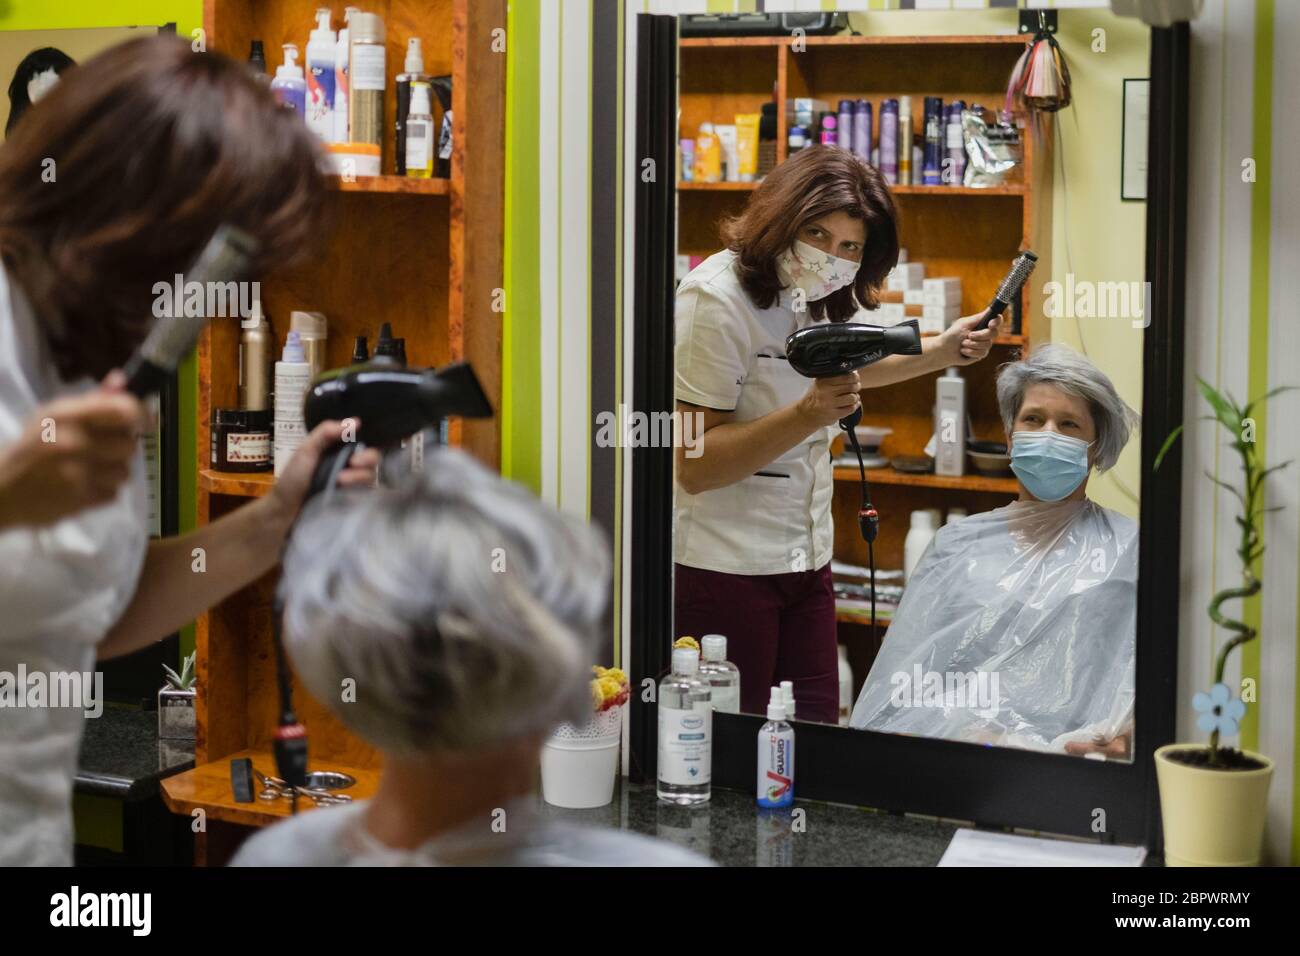 It is the first day back to work in Croatia for hair salons and barber shops during the Covid19 pandemic. Only one person is allowed in to the Salon per appointment, and one barber or hairdresser. Croatia. Stock Photo